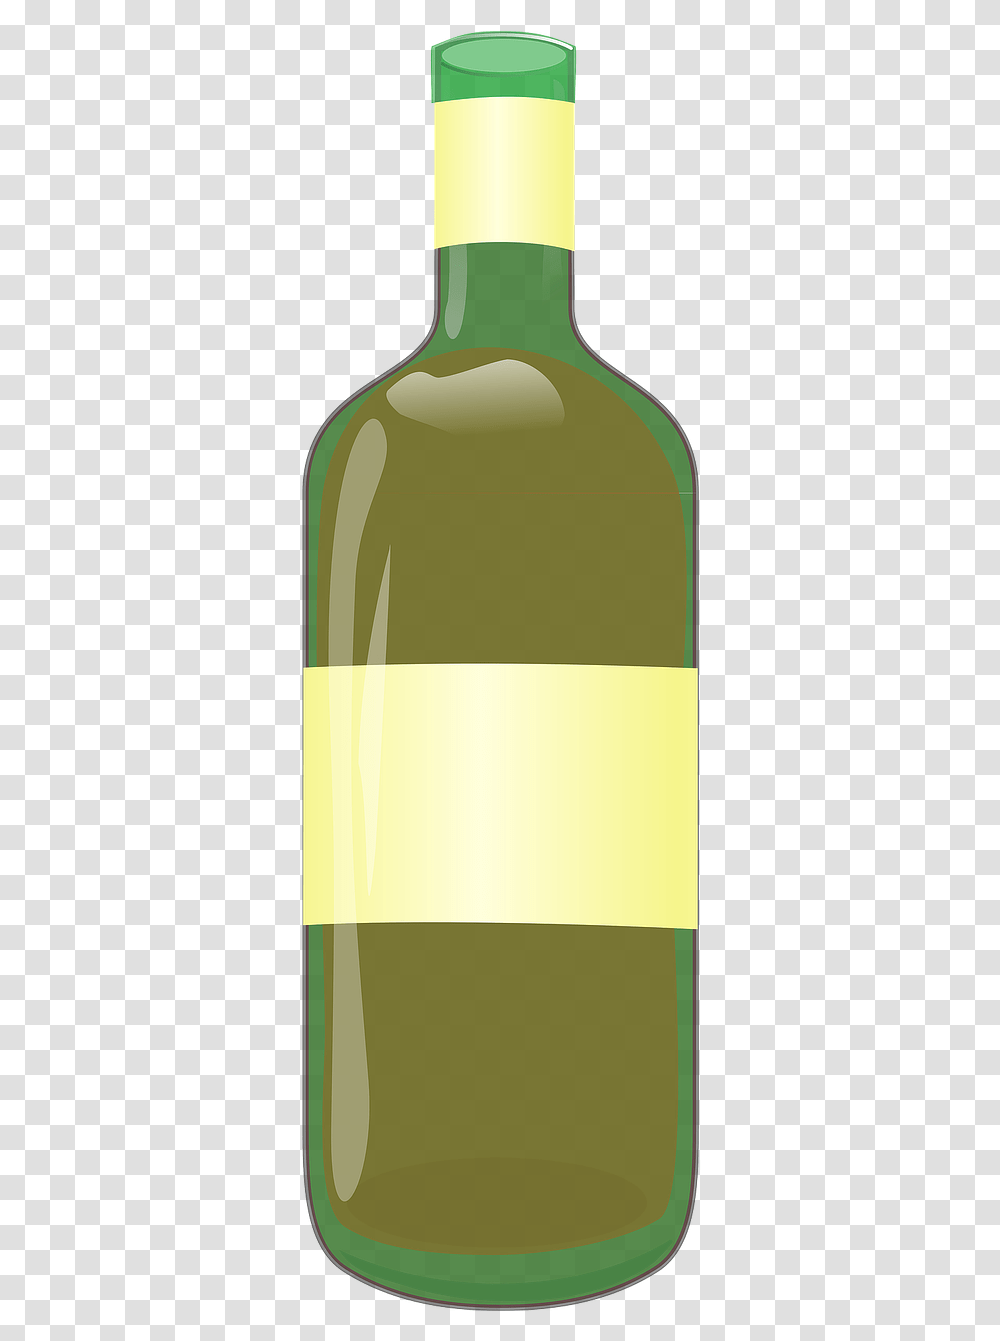 Liquor Bottle Green Free Picture Cheese And Wine Cartoon, Alcohol, Beverage, Drink, Wine Bottle Transparent Png